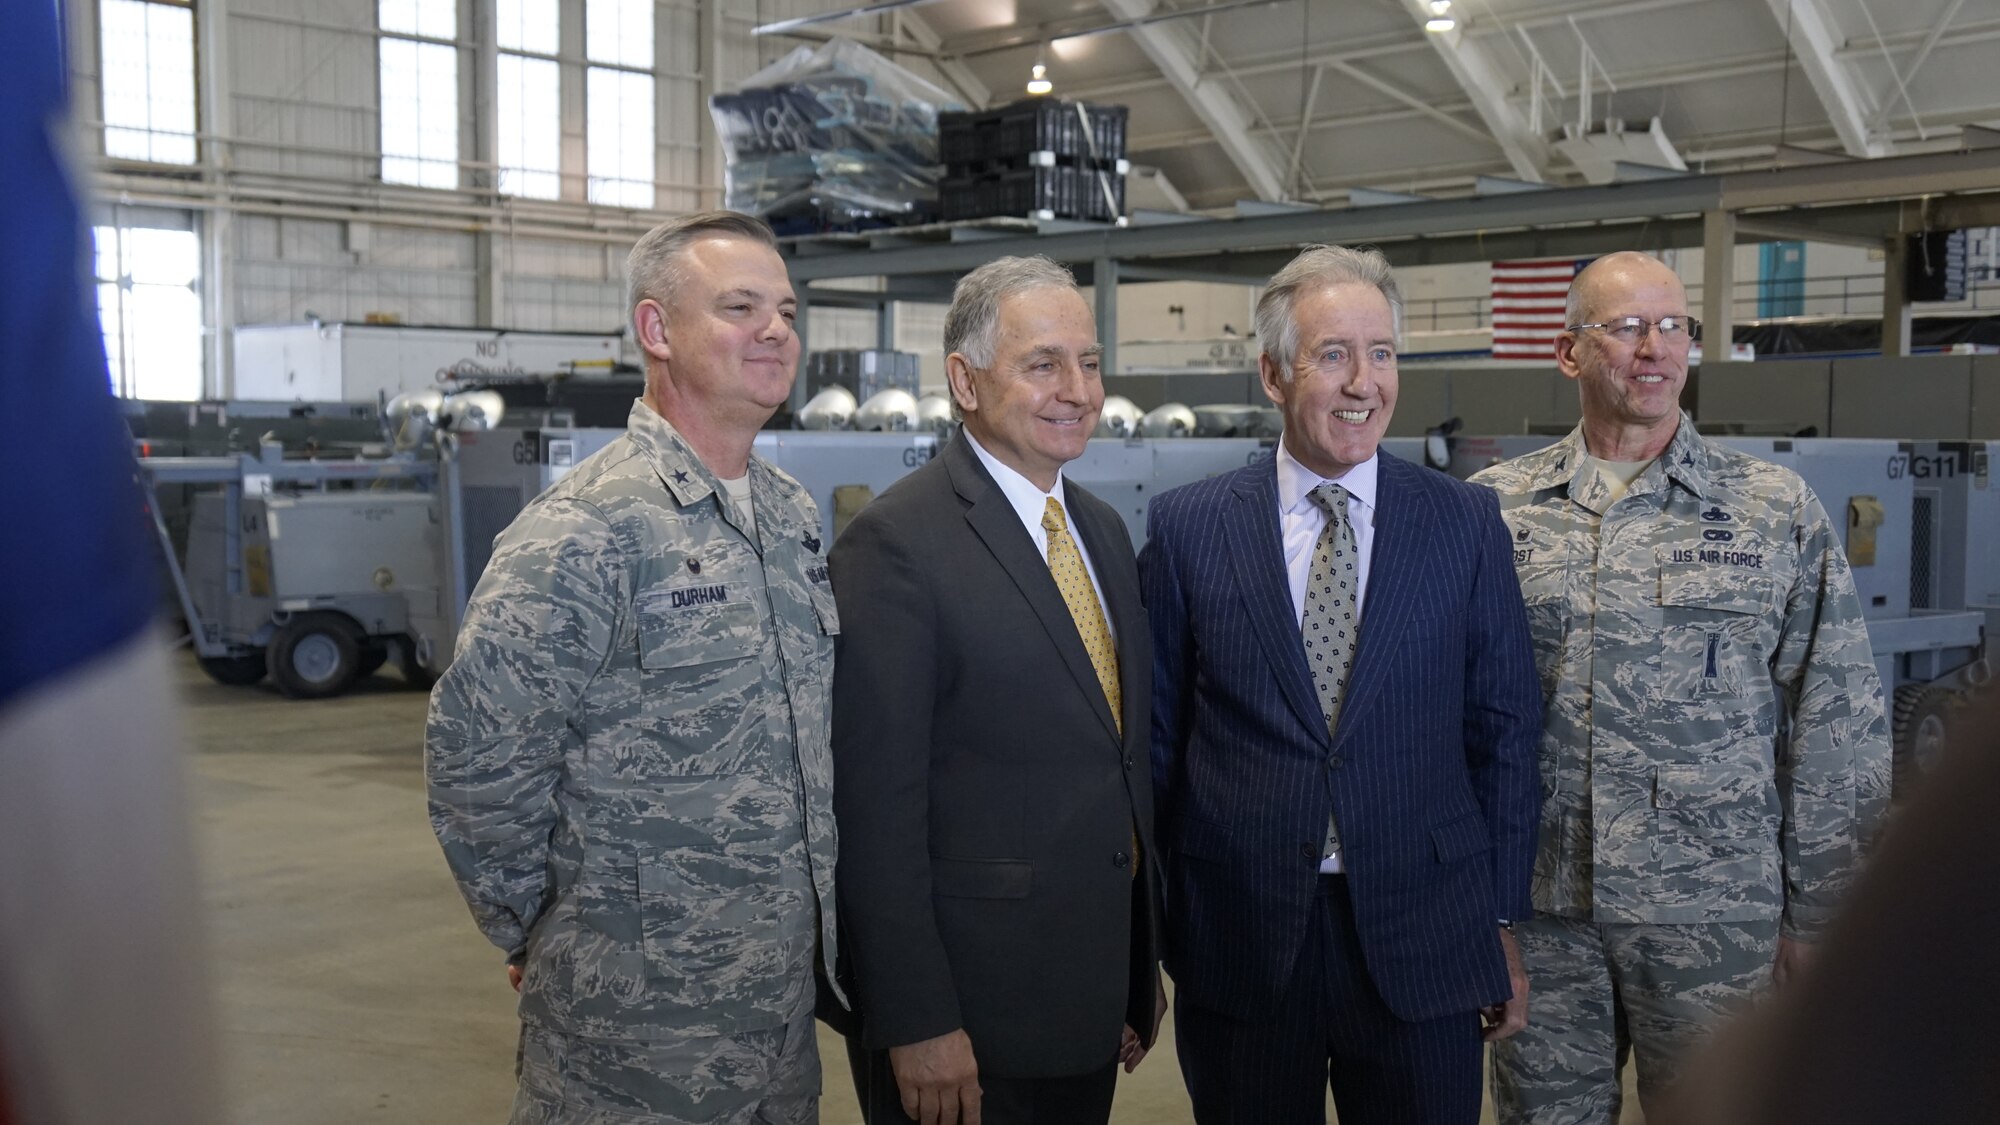 Group shot of 439th Airlift Wing Commander D. Scott Durham, Chicopee Mayor Richard Kos, U.S. Congressman Richard Neal, and 439th Maintenance Group Commander Col. David Post in Hangar 9, one of Westover's 80-year-old hangars.